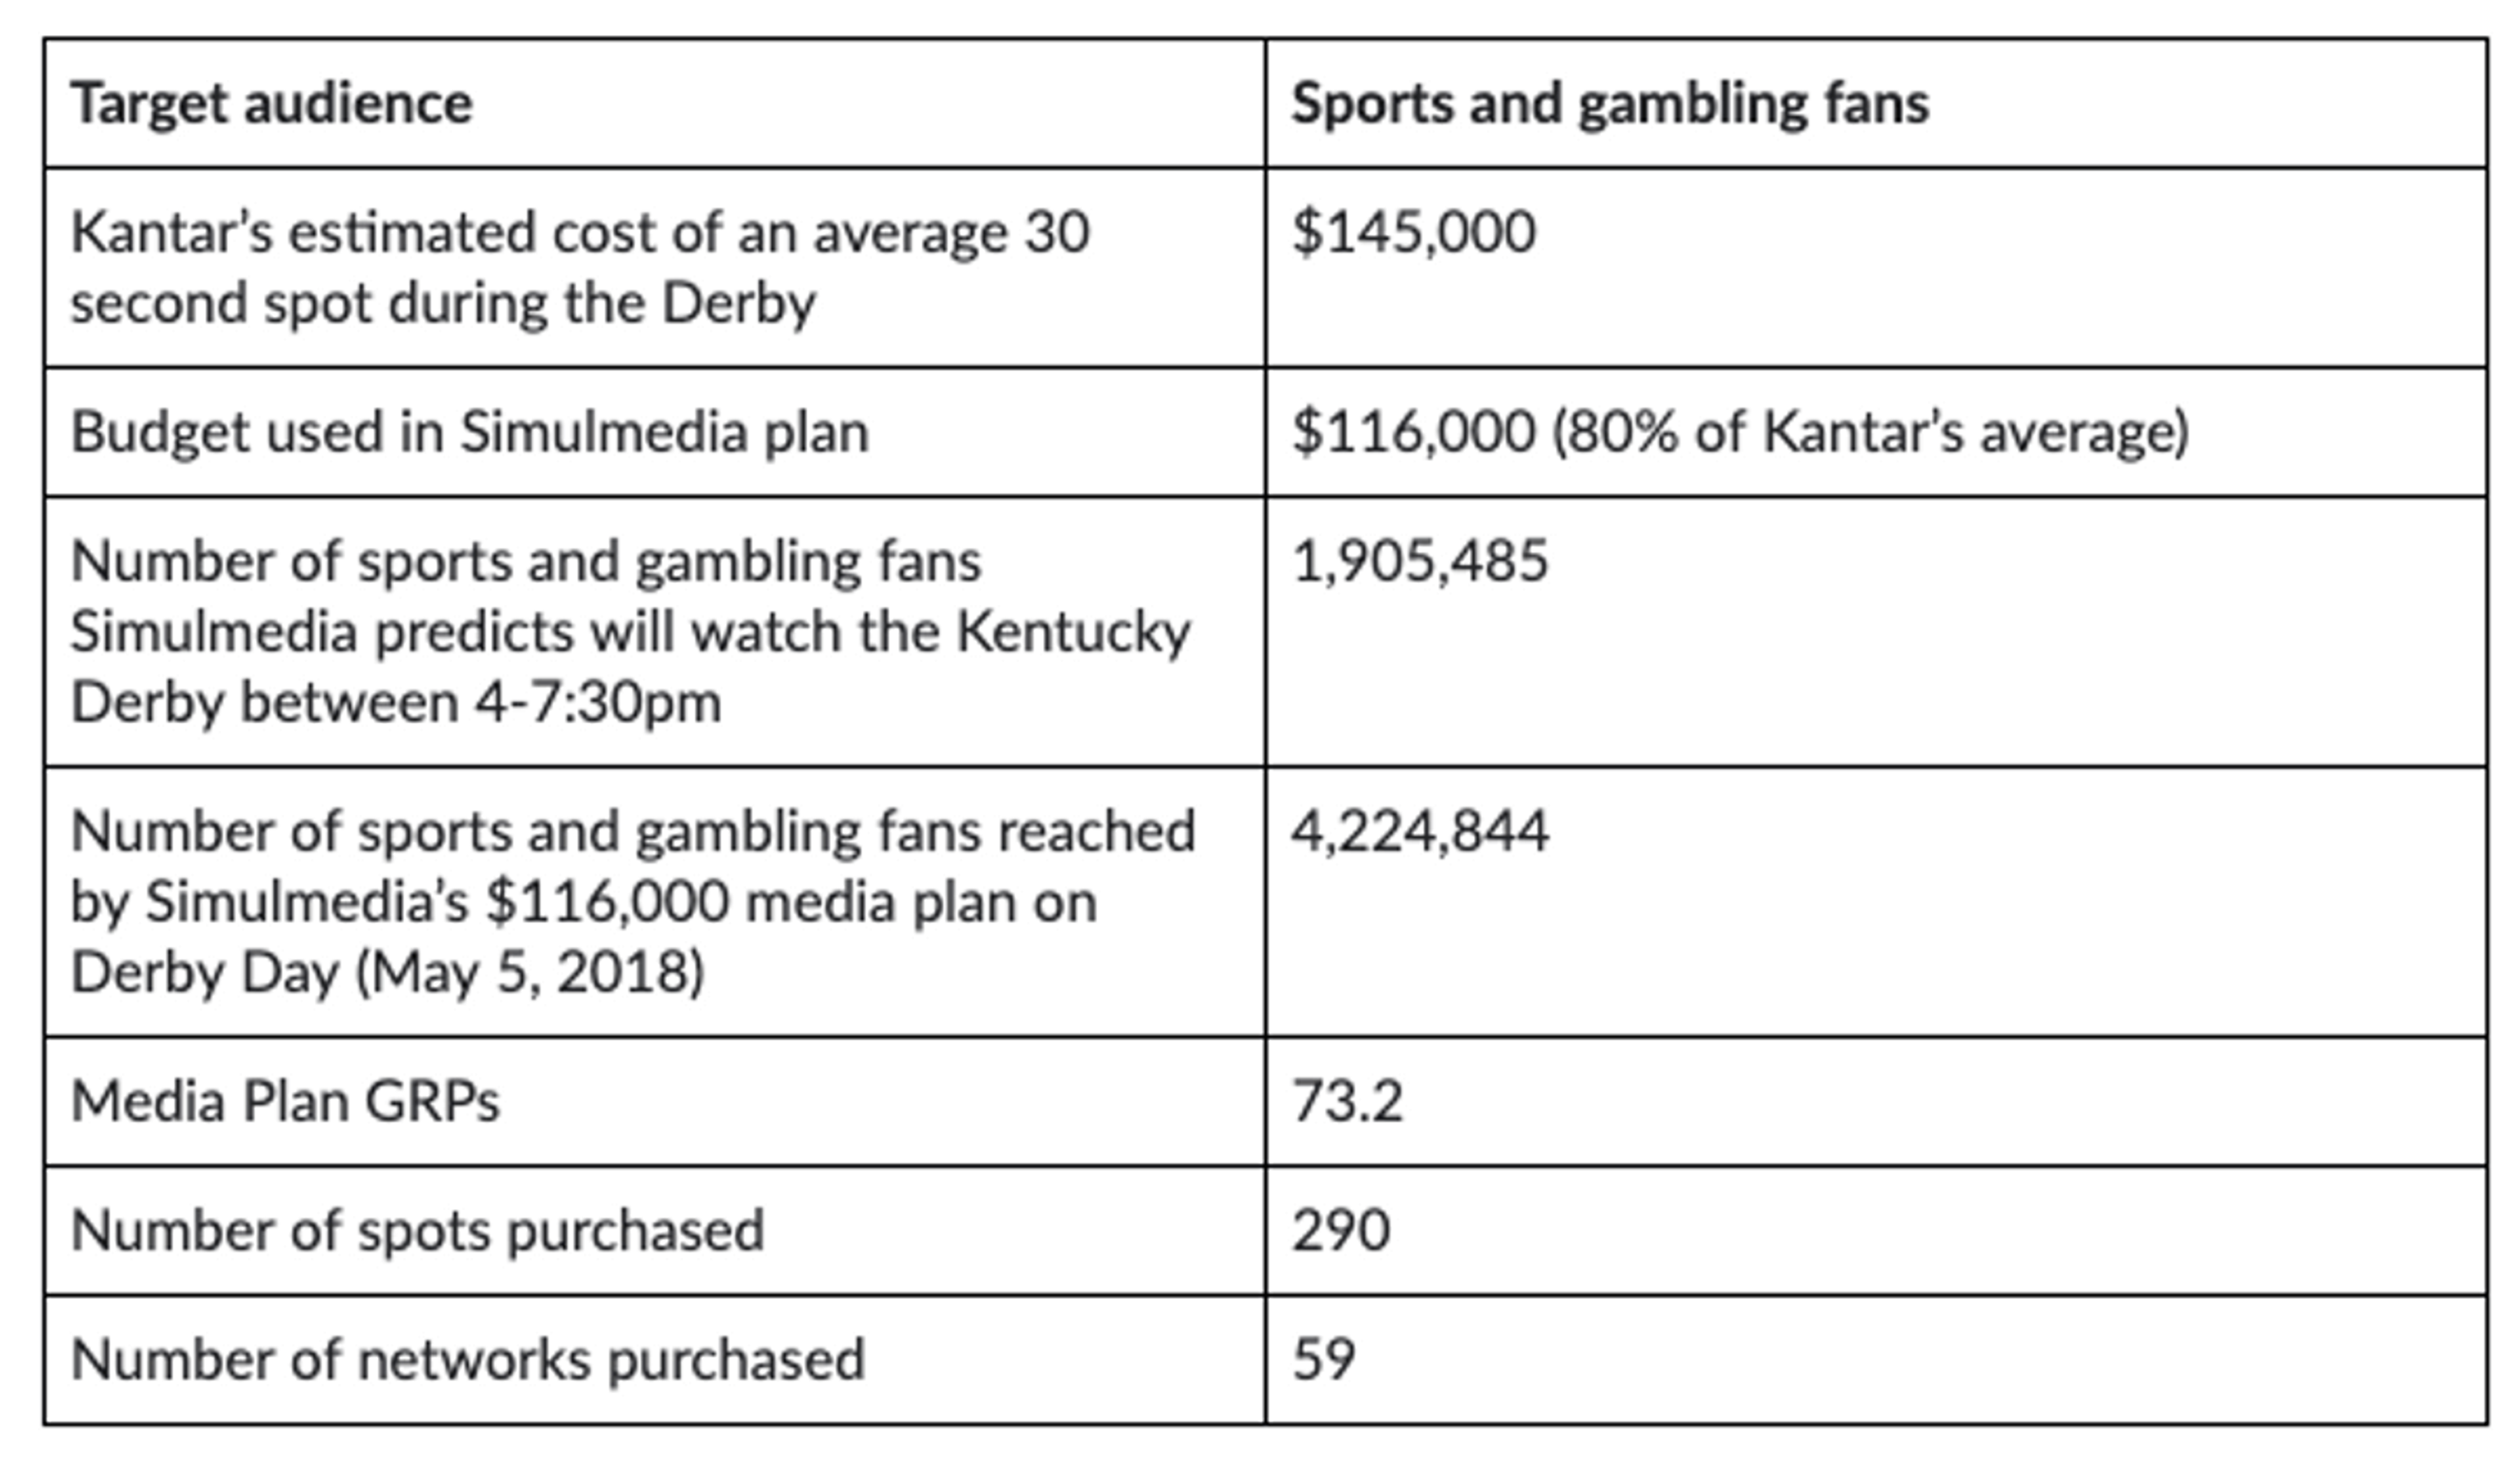 Table showing what a sample TV advertising plan could deliver in number of sports and gambling fans reached.